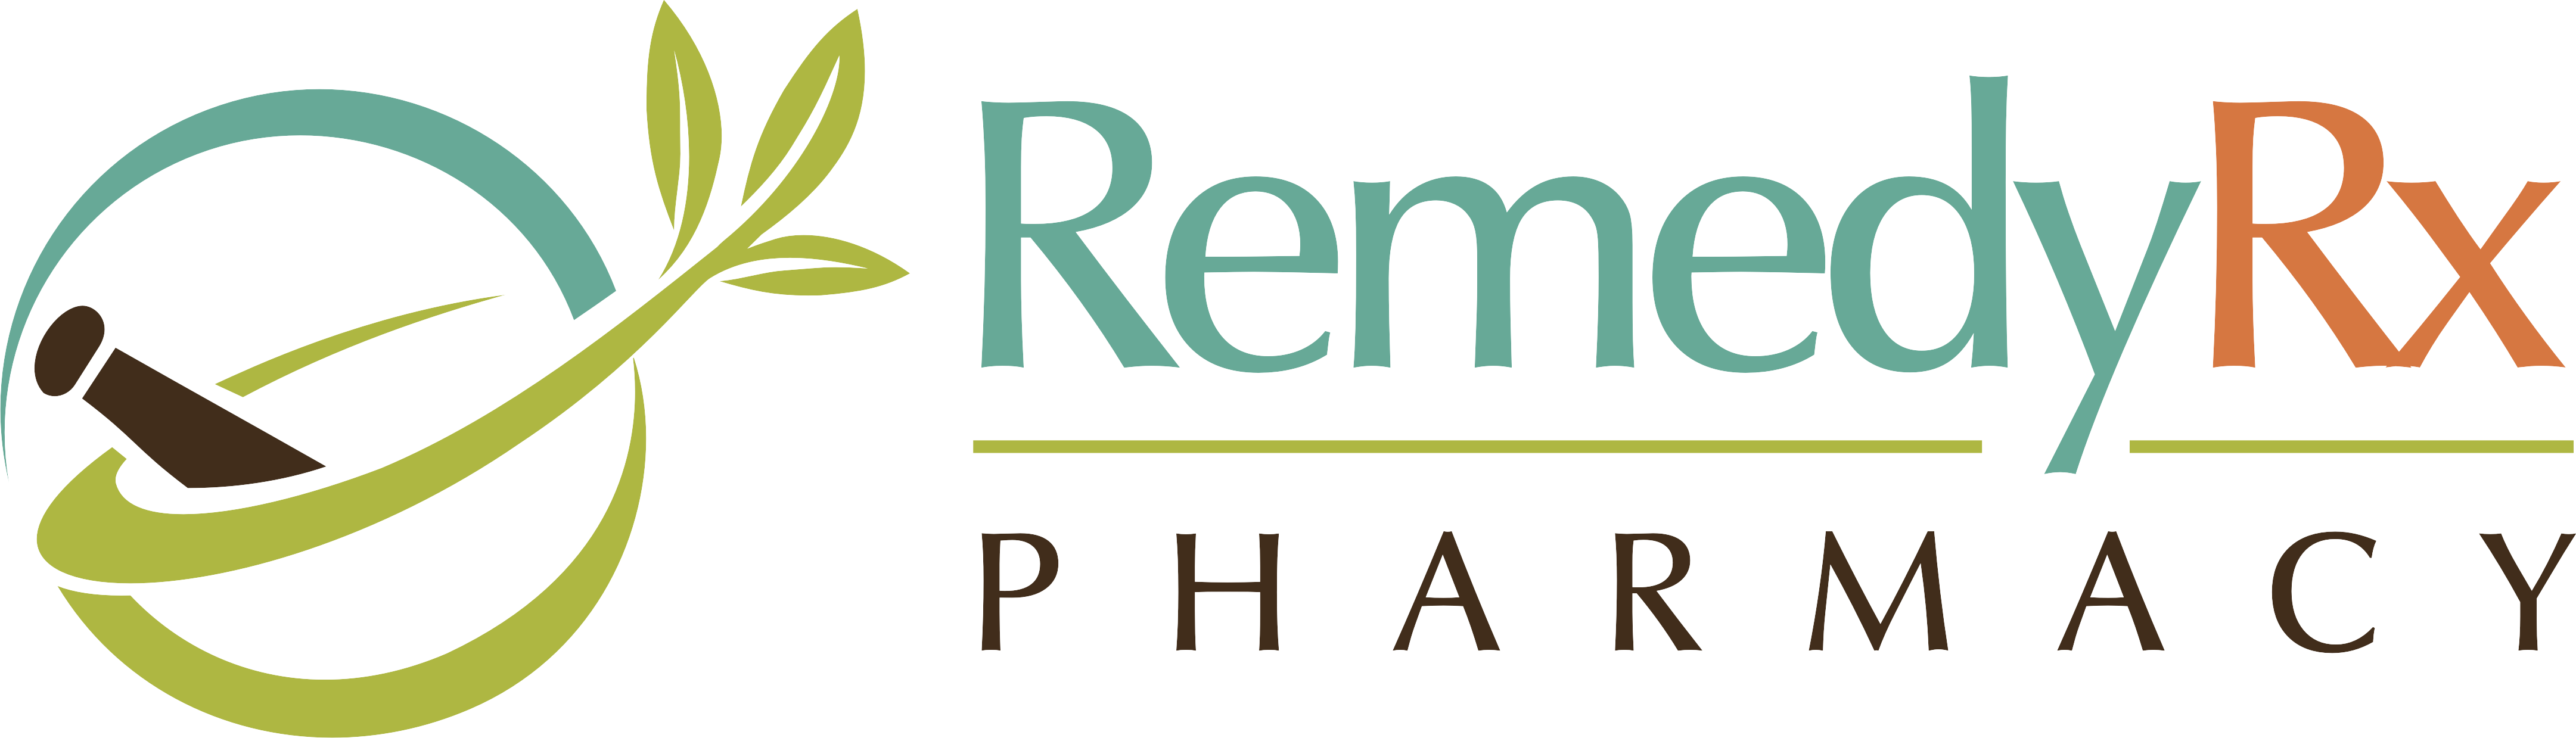 Contact - Remedy Rx Pharmacy - Remedy Rx Pharmacy & Compounding